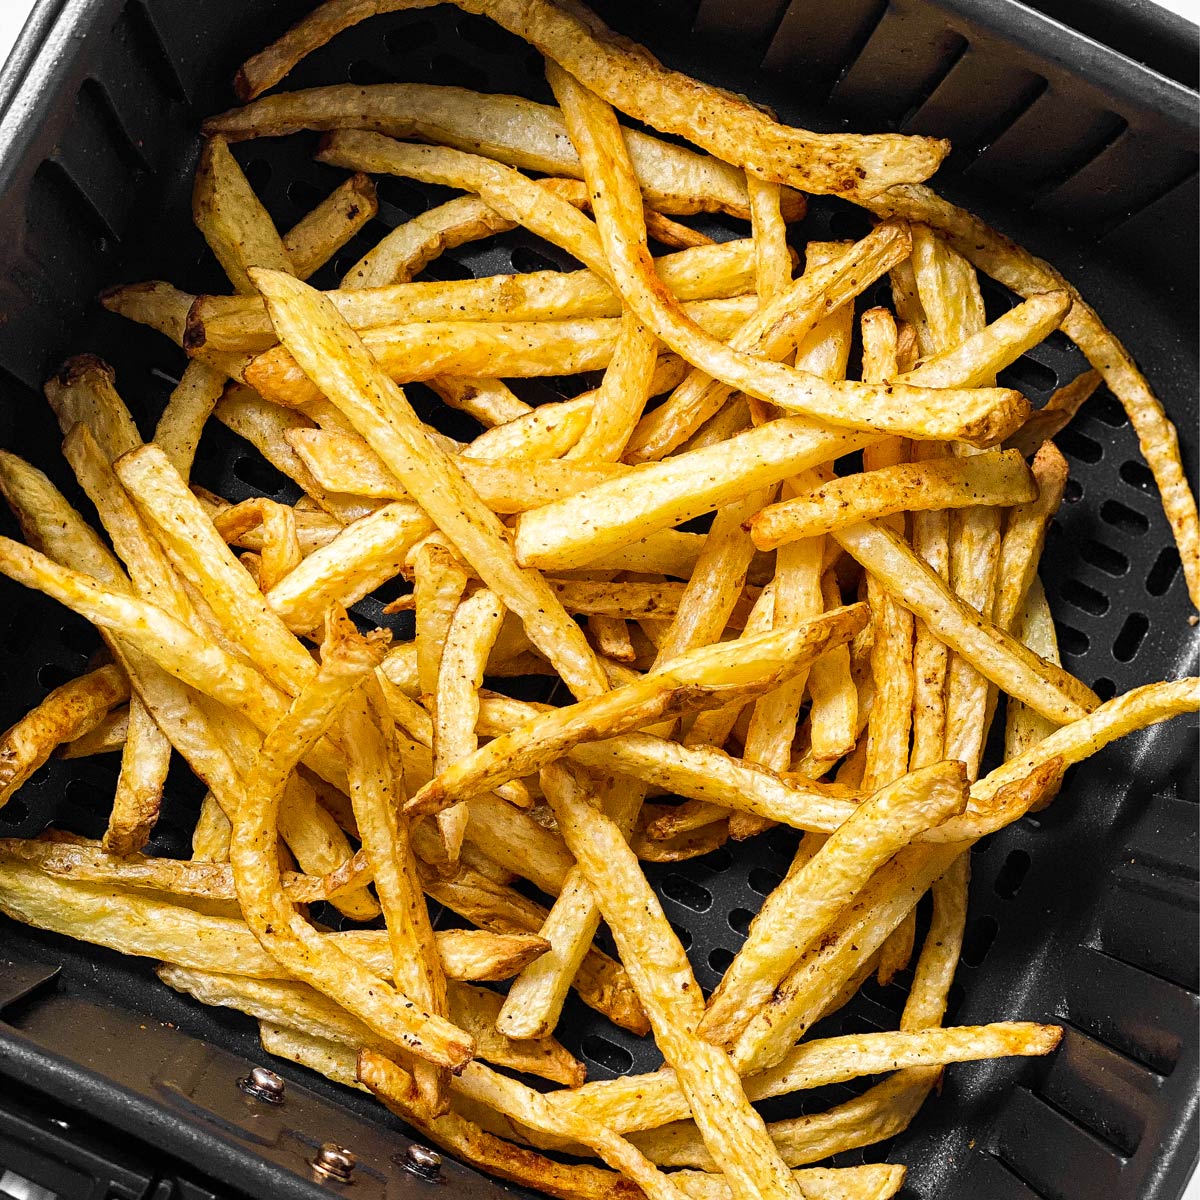 https://www.savorynothings.com/wp-content/uploads/2022/01/air-fryer-french-fries-recipe-image-sq.jpg